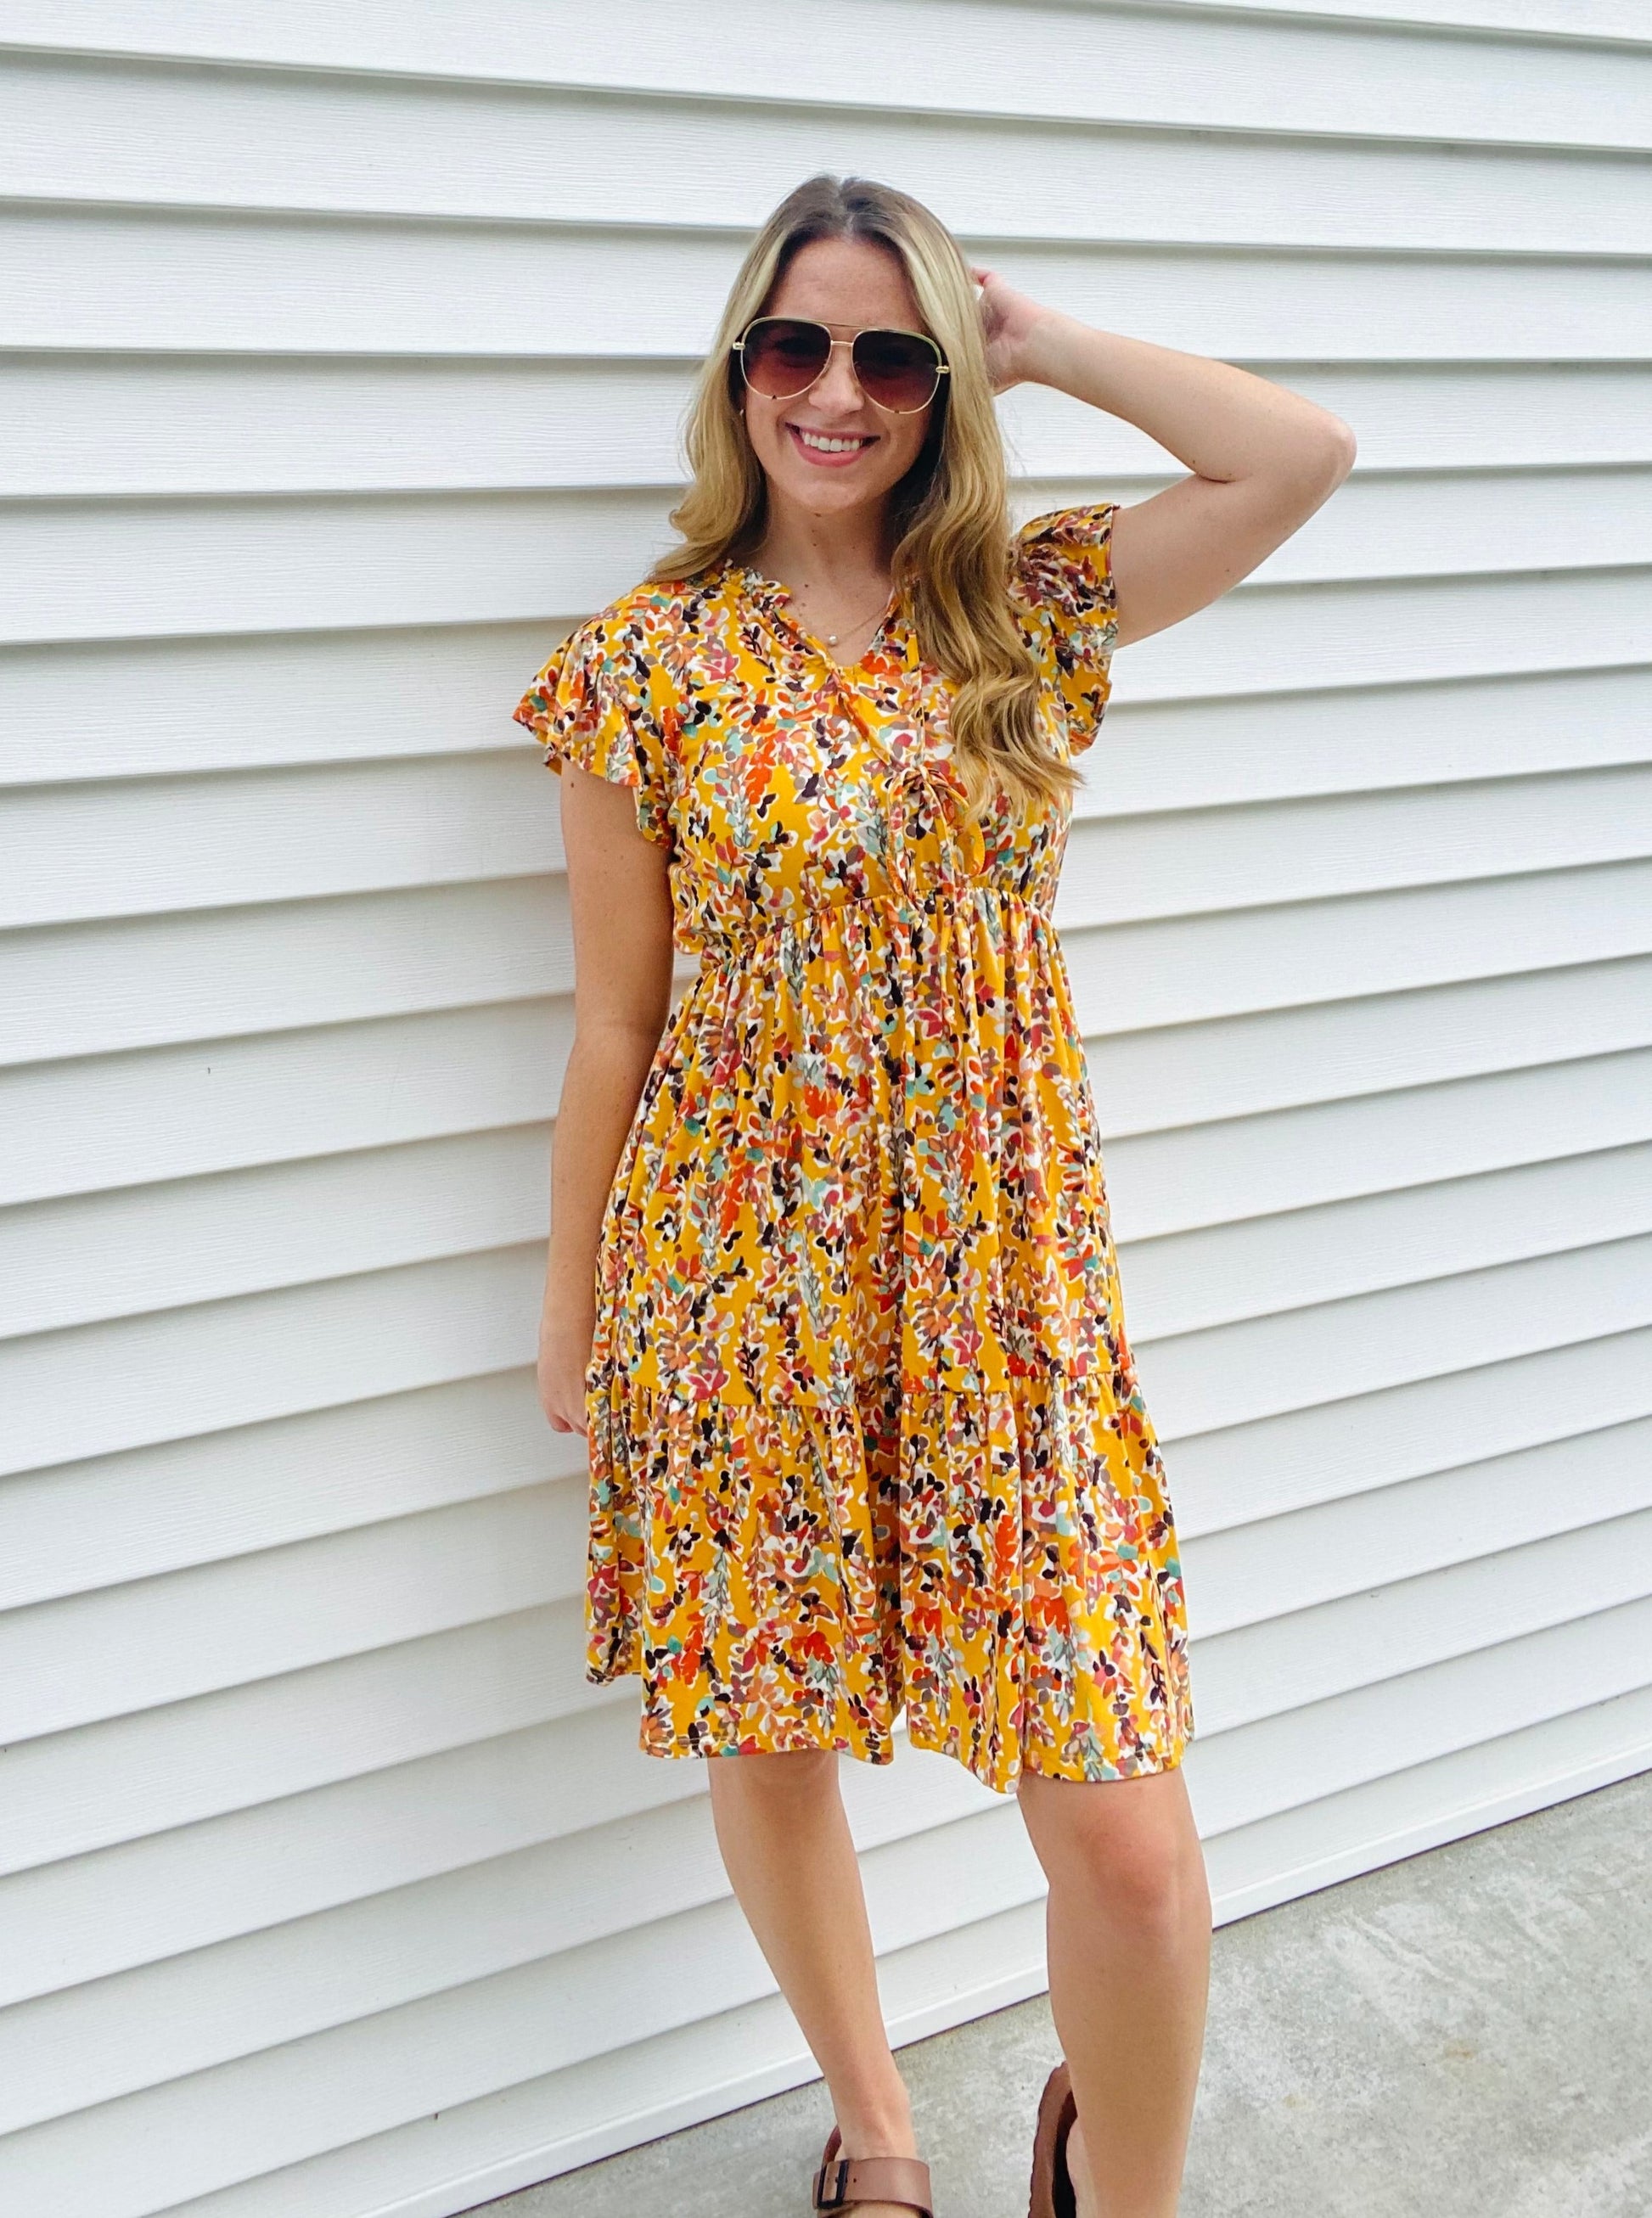 This Honey Ruffle Floral Dress is perfect for any occassion. Boasting beautiful features such as a v-keyhole neck with string-tied ruffle frill, a babydoll fit and flare silhouette, and tiered ruffle hem, this dress offers a flattering and elegant look. The vibrant multicolor floral print knit pairs perfectly with the side pockets for a practical and stylish dress.